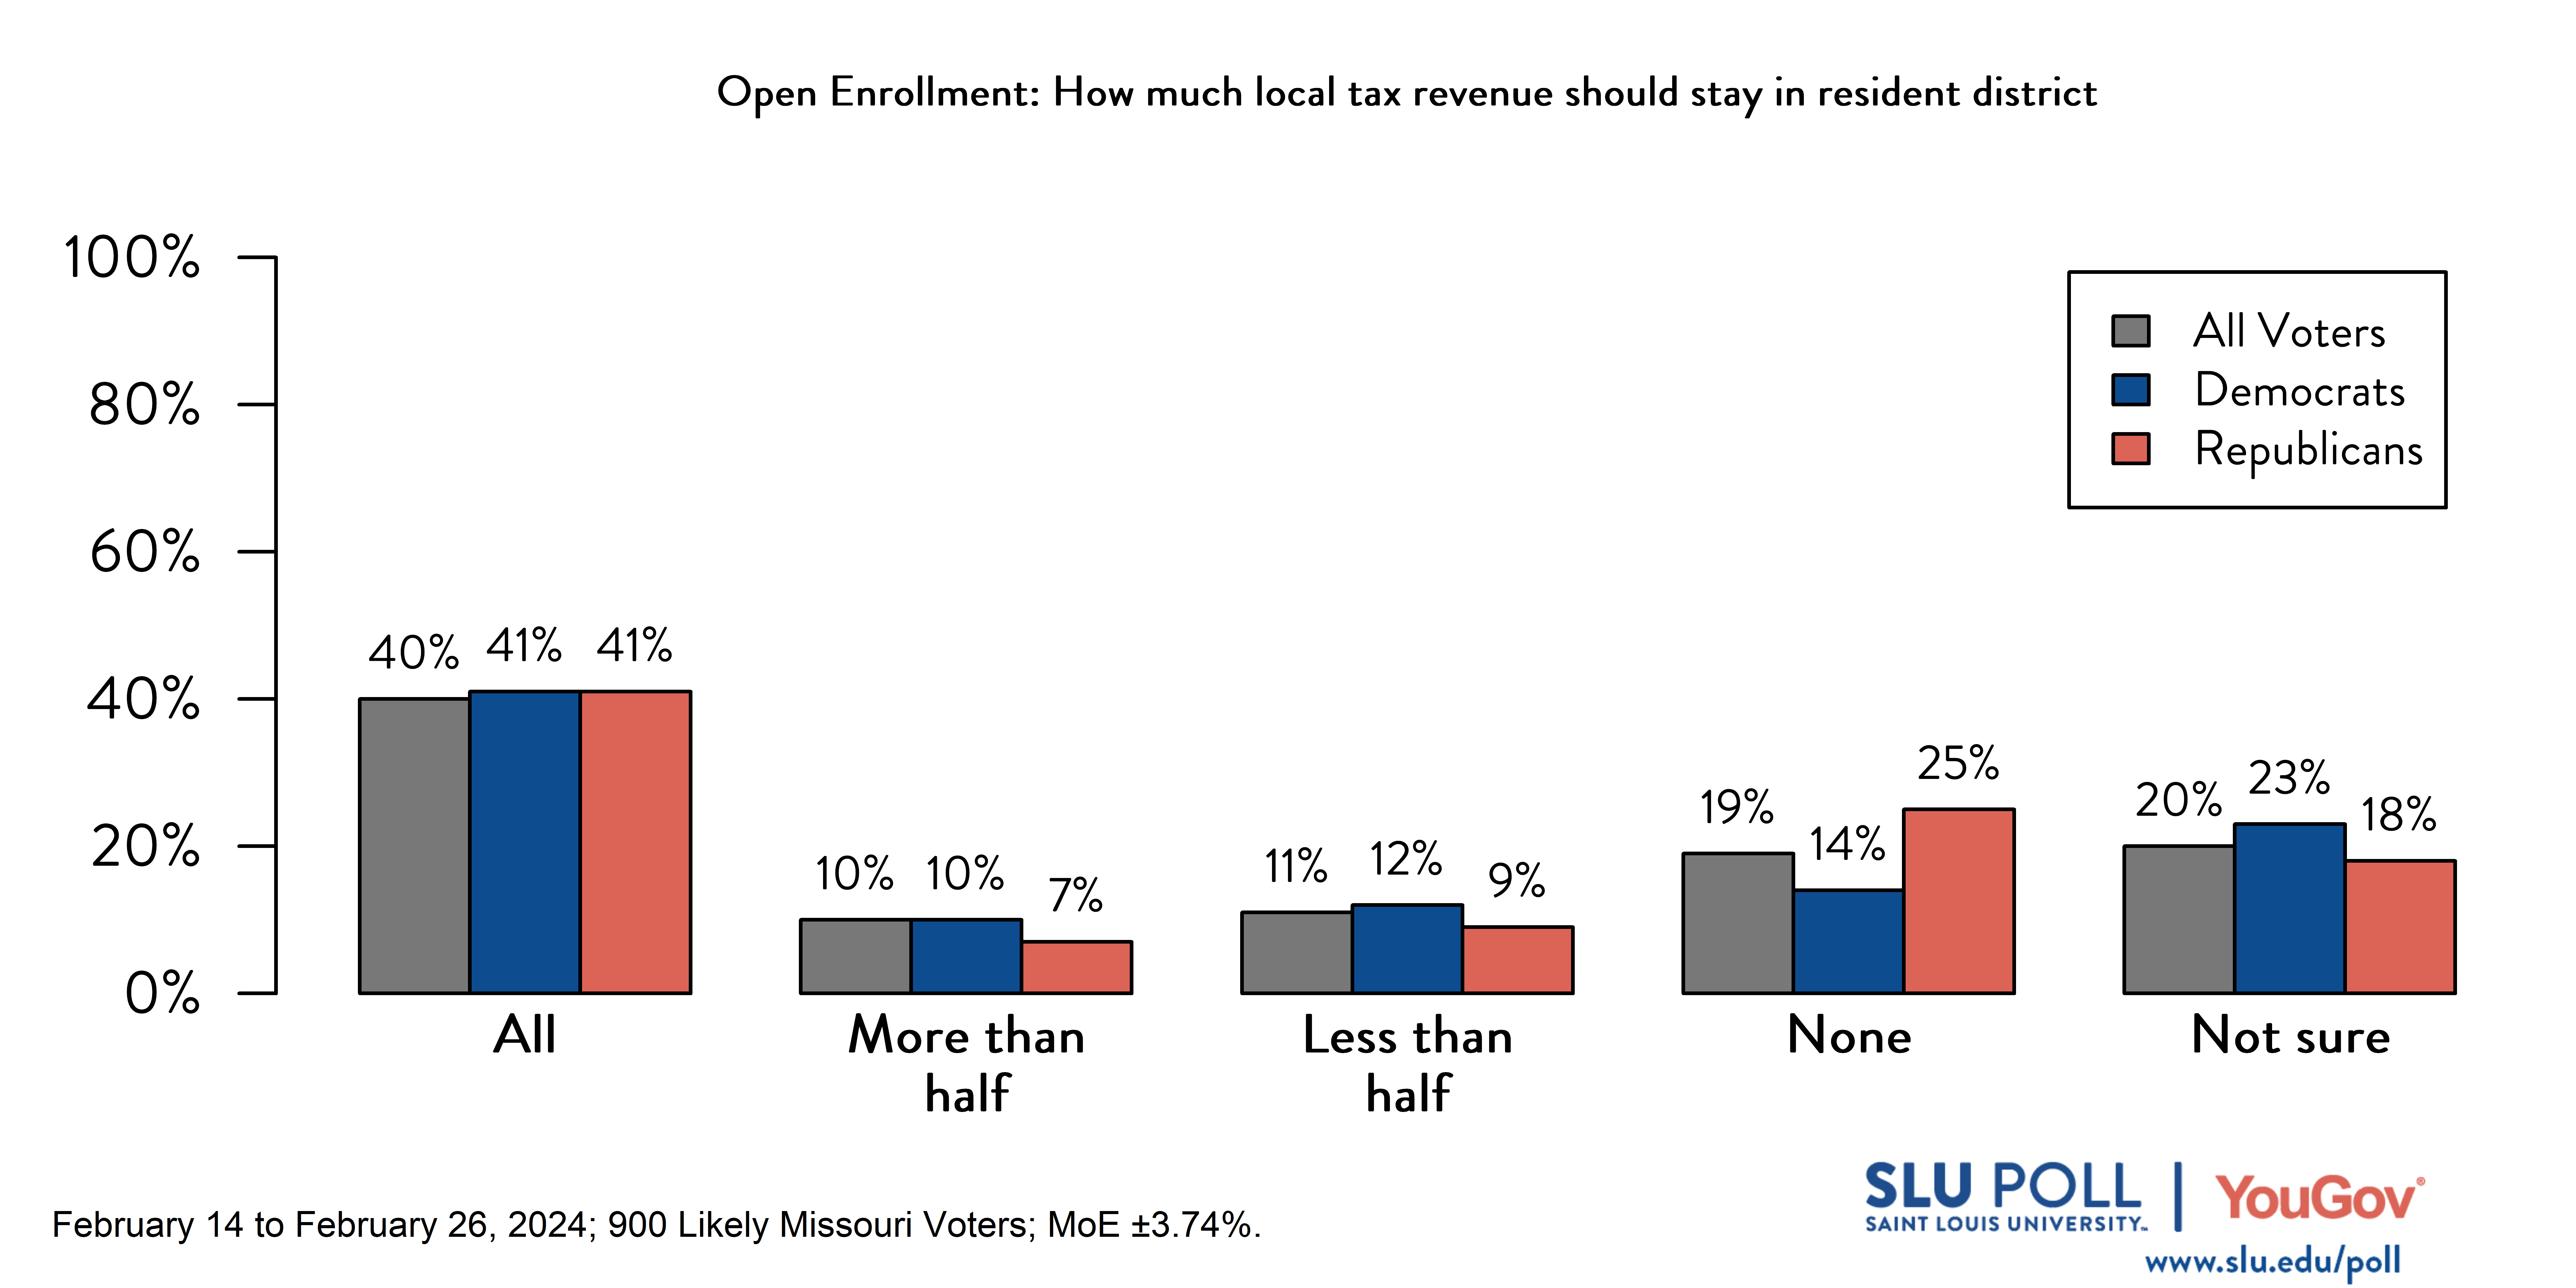 Likely voters' responses to 'If Missouri allows students to enroll in public schools outside of their resident school districts (that is, the district where they live), how should local tax revenue designated for a student's education be allocated for students who attend school outside of the district where they live?': 40% All local tax revenue should stay in the student's resident district, where the student lives., 10% Less than half of local tax revenue should transfer to the n, 11% More than half of local tax revenue should transfer to the n, 19% All local tax revenue should transfer to the nonresident school district, where the student now attends school., and 20% Not sure.. Democratic voters' responses: ' 41% All local tax revenue should stay in the student's resident district, where the student lives., 10% Less than half of local tax revenue should transfer to the n, 12% More than half of local tax revenue should transfer to the n, 14% All local tax revenue should transfer to the nonresident school district, where the student now attends school., and 23% Not sure.. Republican voters' responses:  41% All local tax revenue should stay in the student's resident district, where the student lives., 7% Less than half of local tax revenue should transfer to the n, 9% More than half of local tax revenue should transfer to the n, 25% All local tax revenue should transfer to the nonresident school district, where the student now attends school., and 18% Not sure..